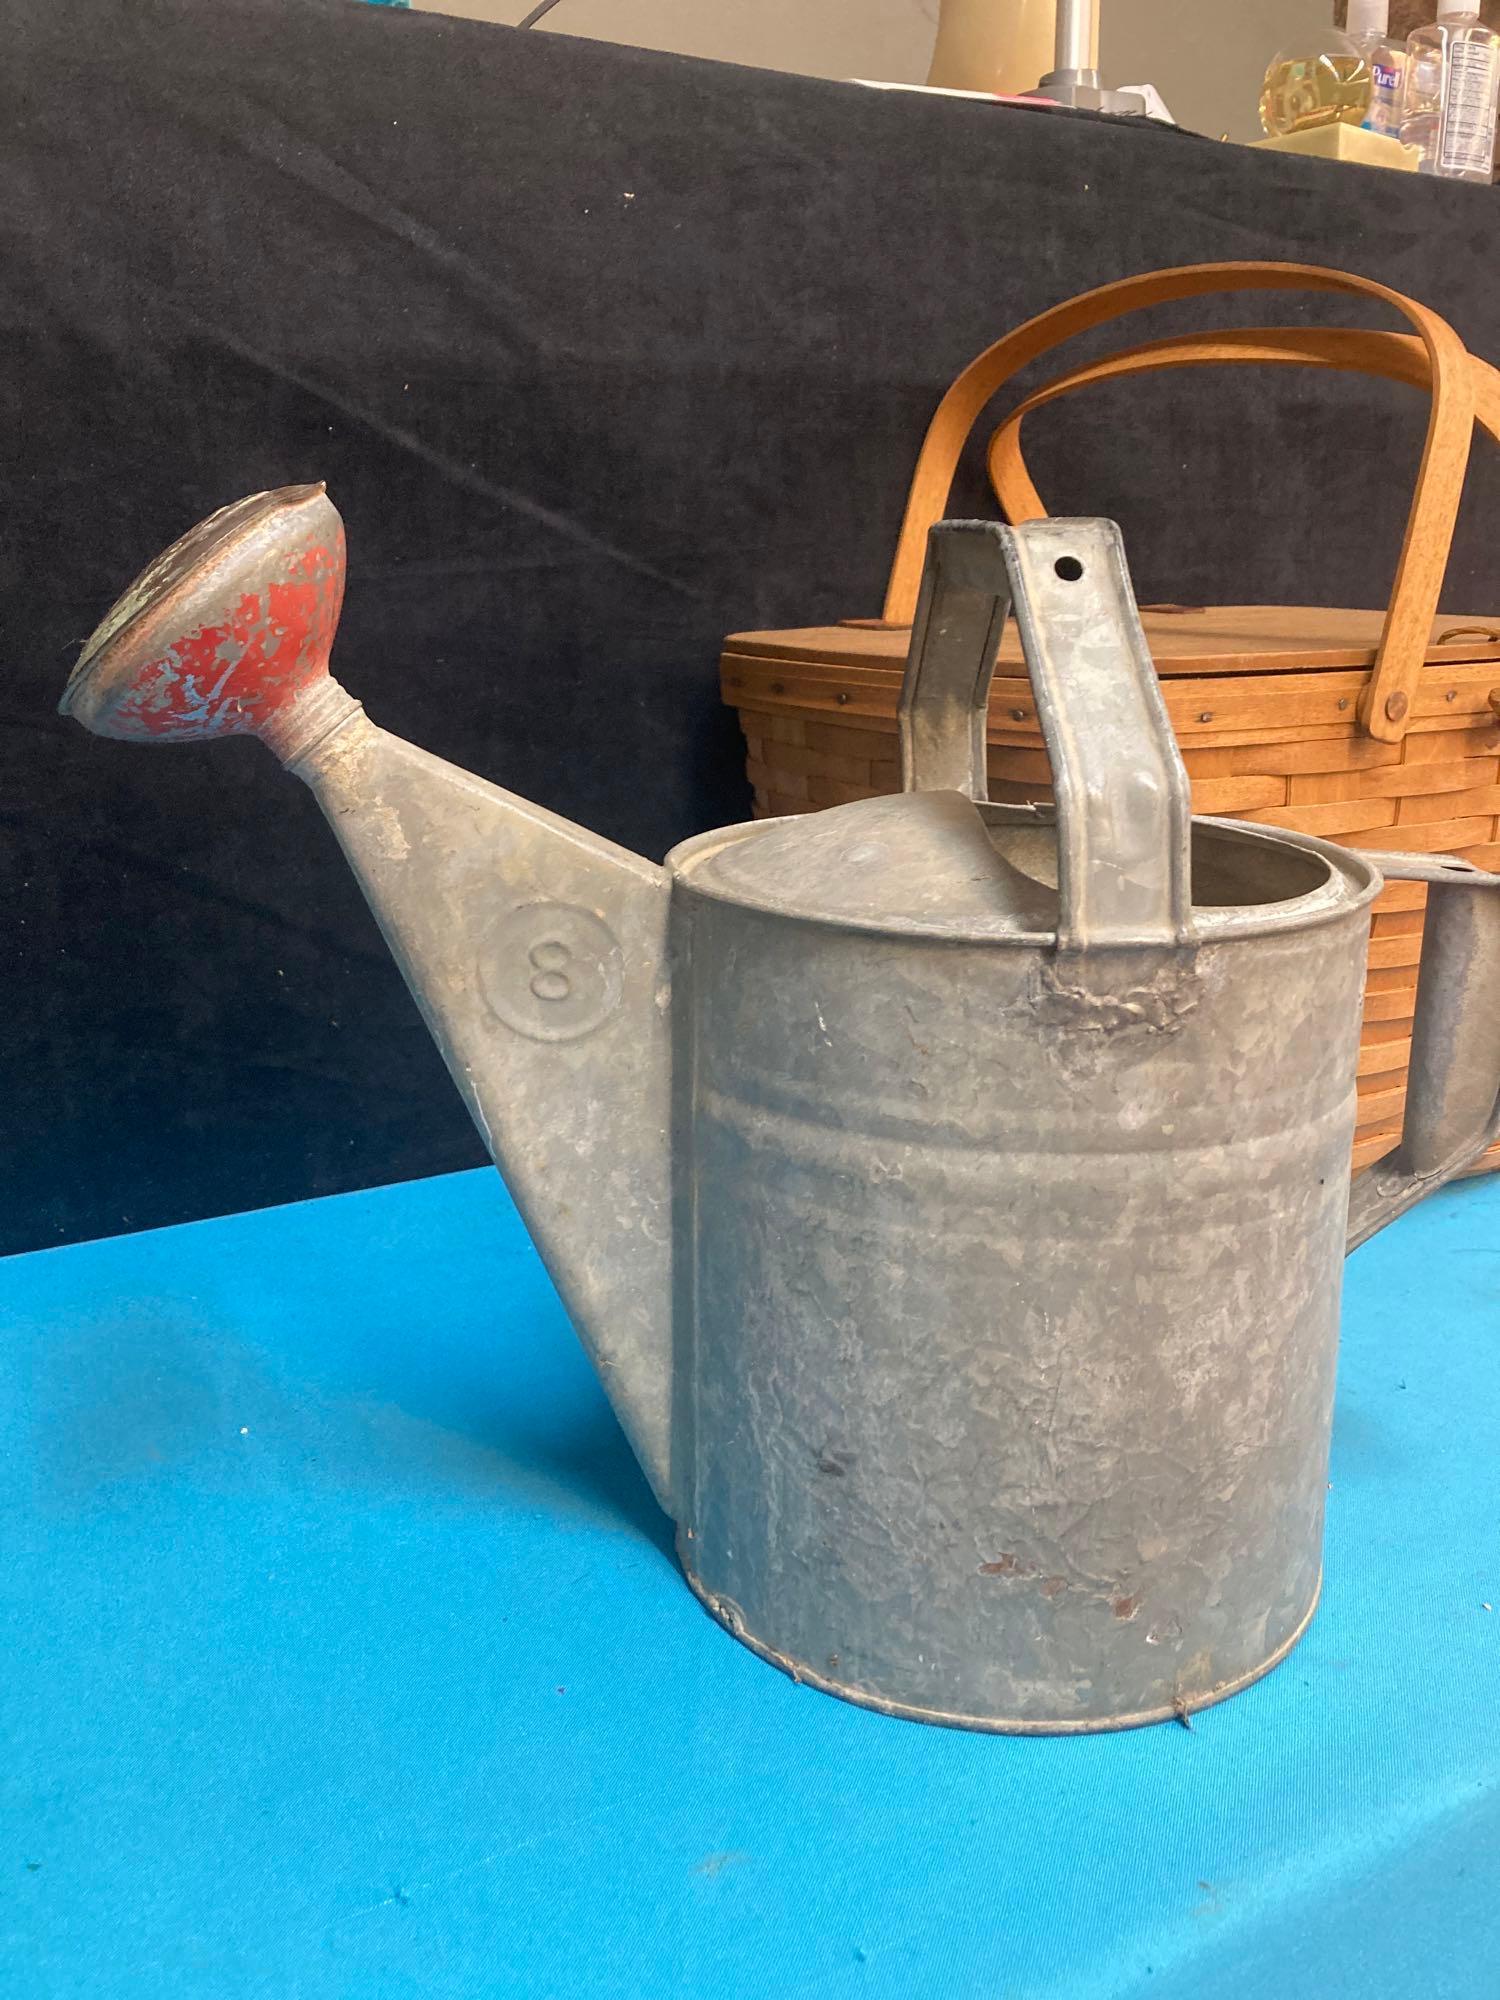 Galvanized watering can and Longaberger picnic basket